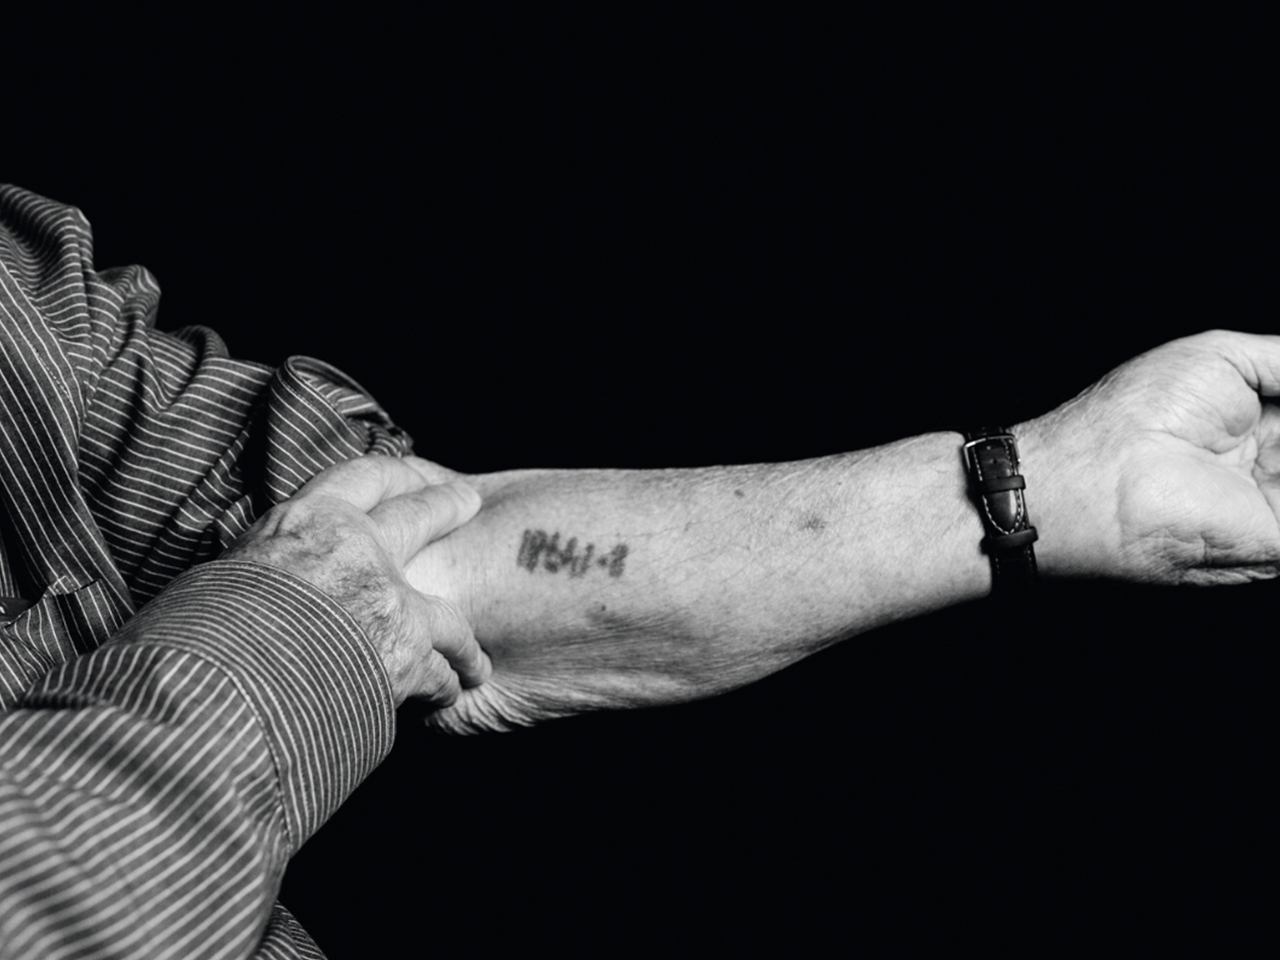 A survivor shows his arm with an inmate number tattooed on it